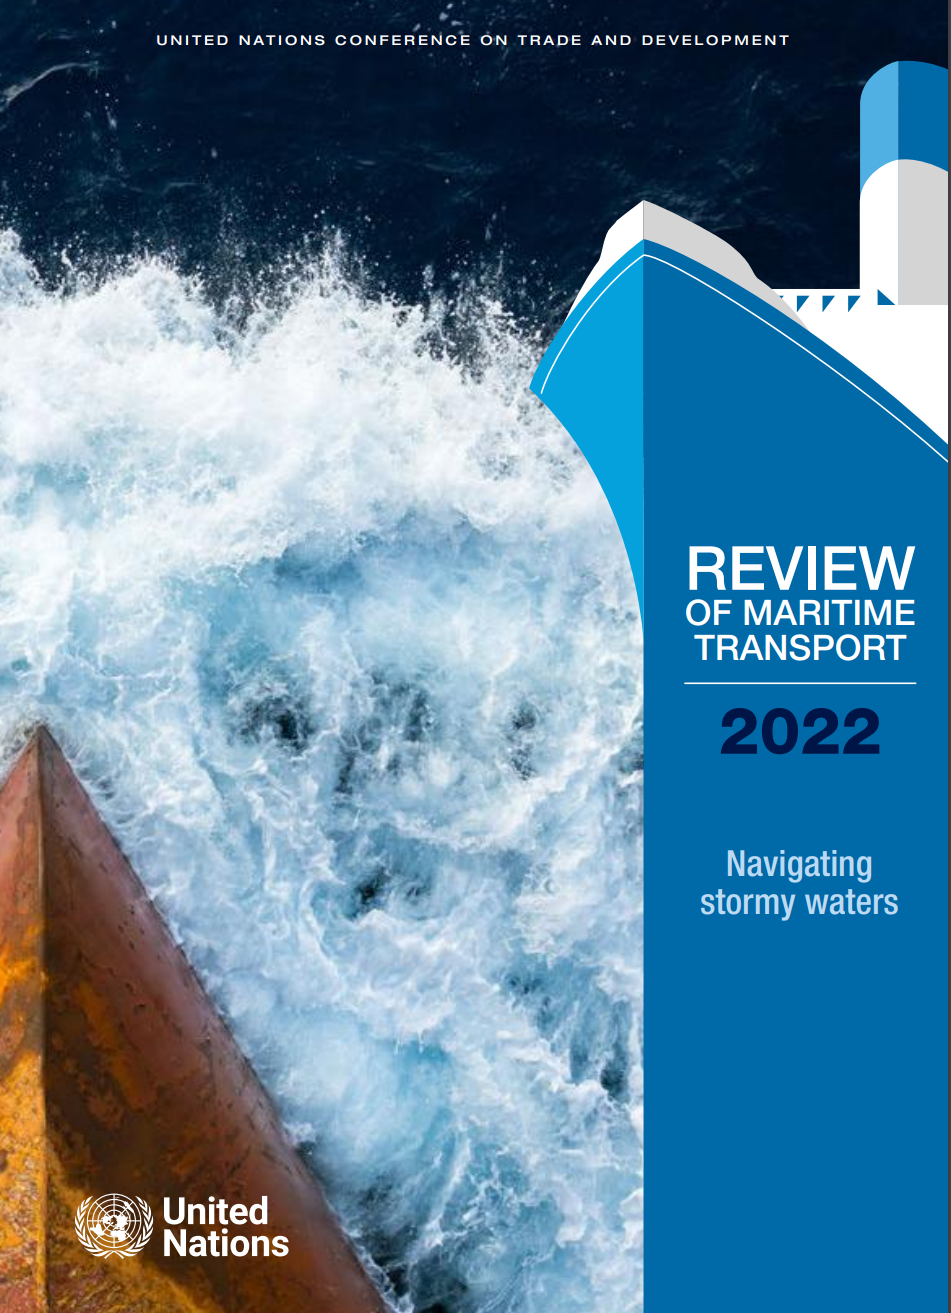 UNCTAD’s Review of Maritime Transport 2022